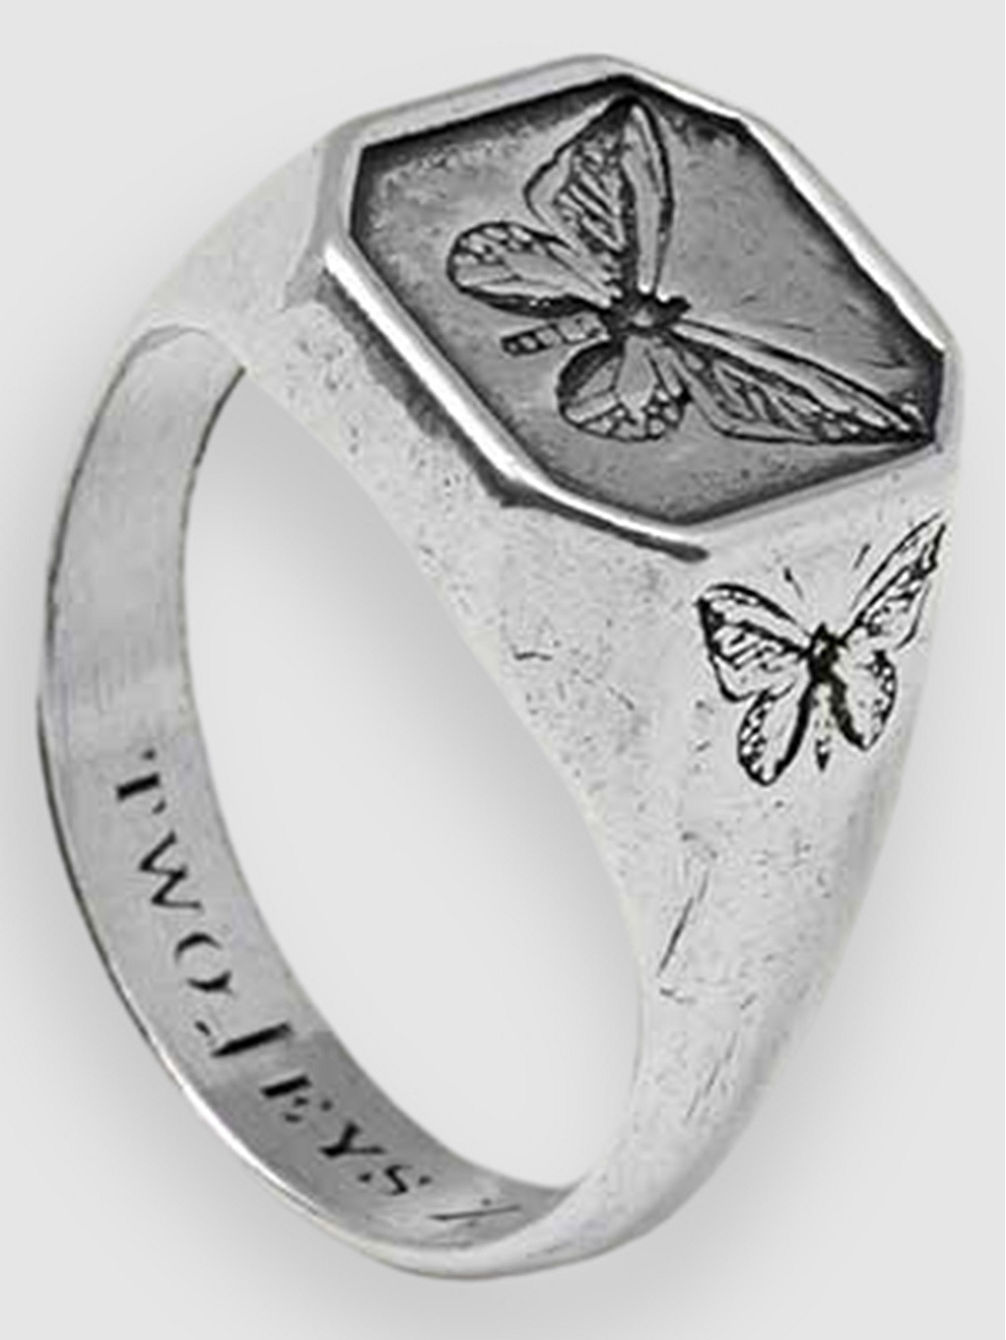 Butterfly Effect Ring 20 Bigiotteria